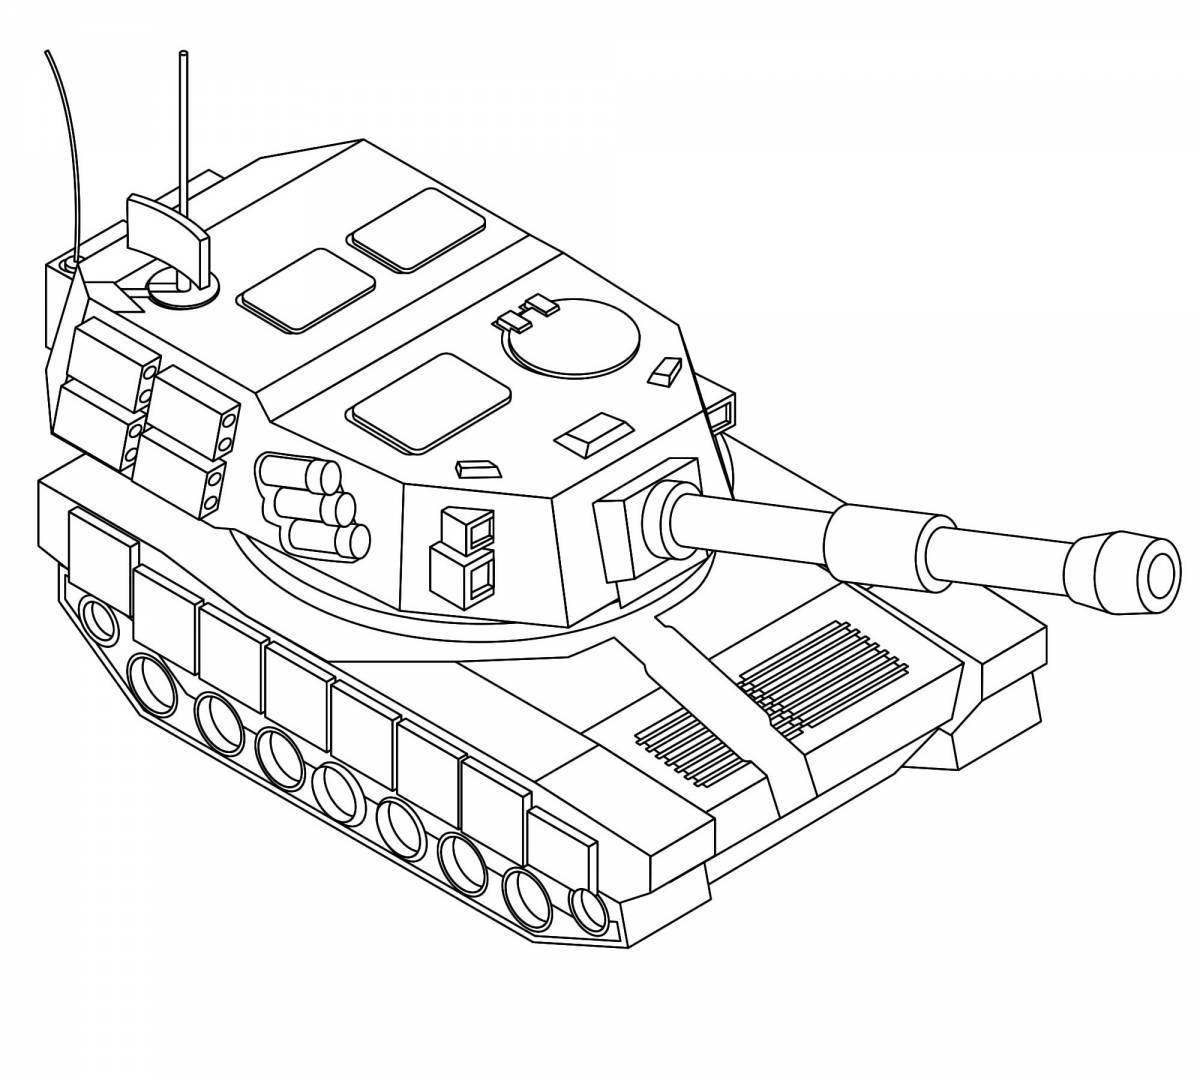 T34 tank for kids #11